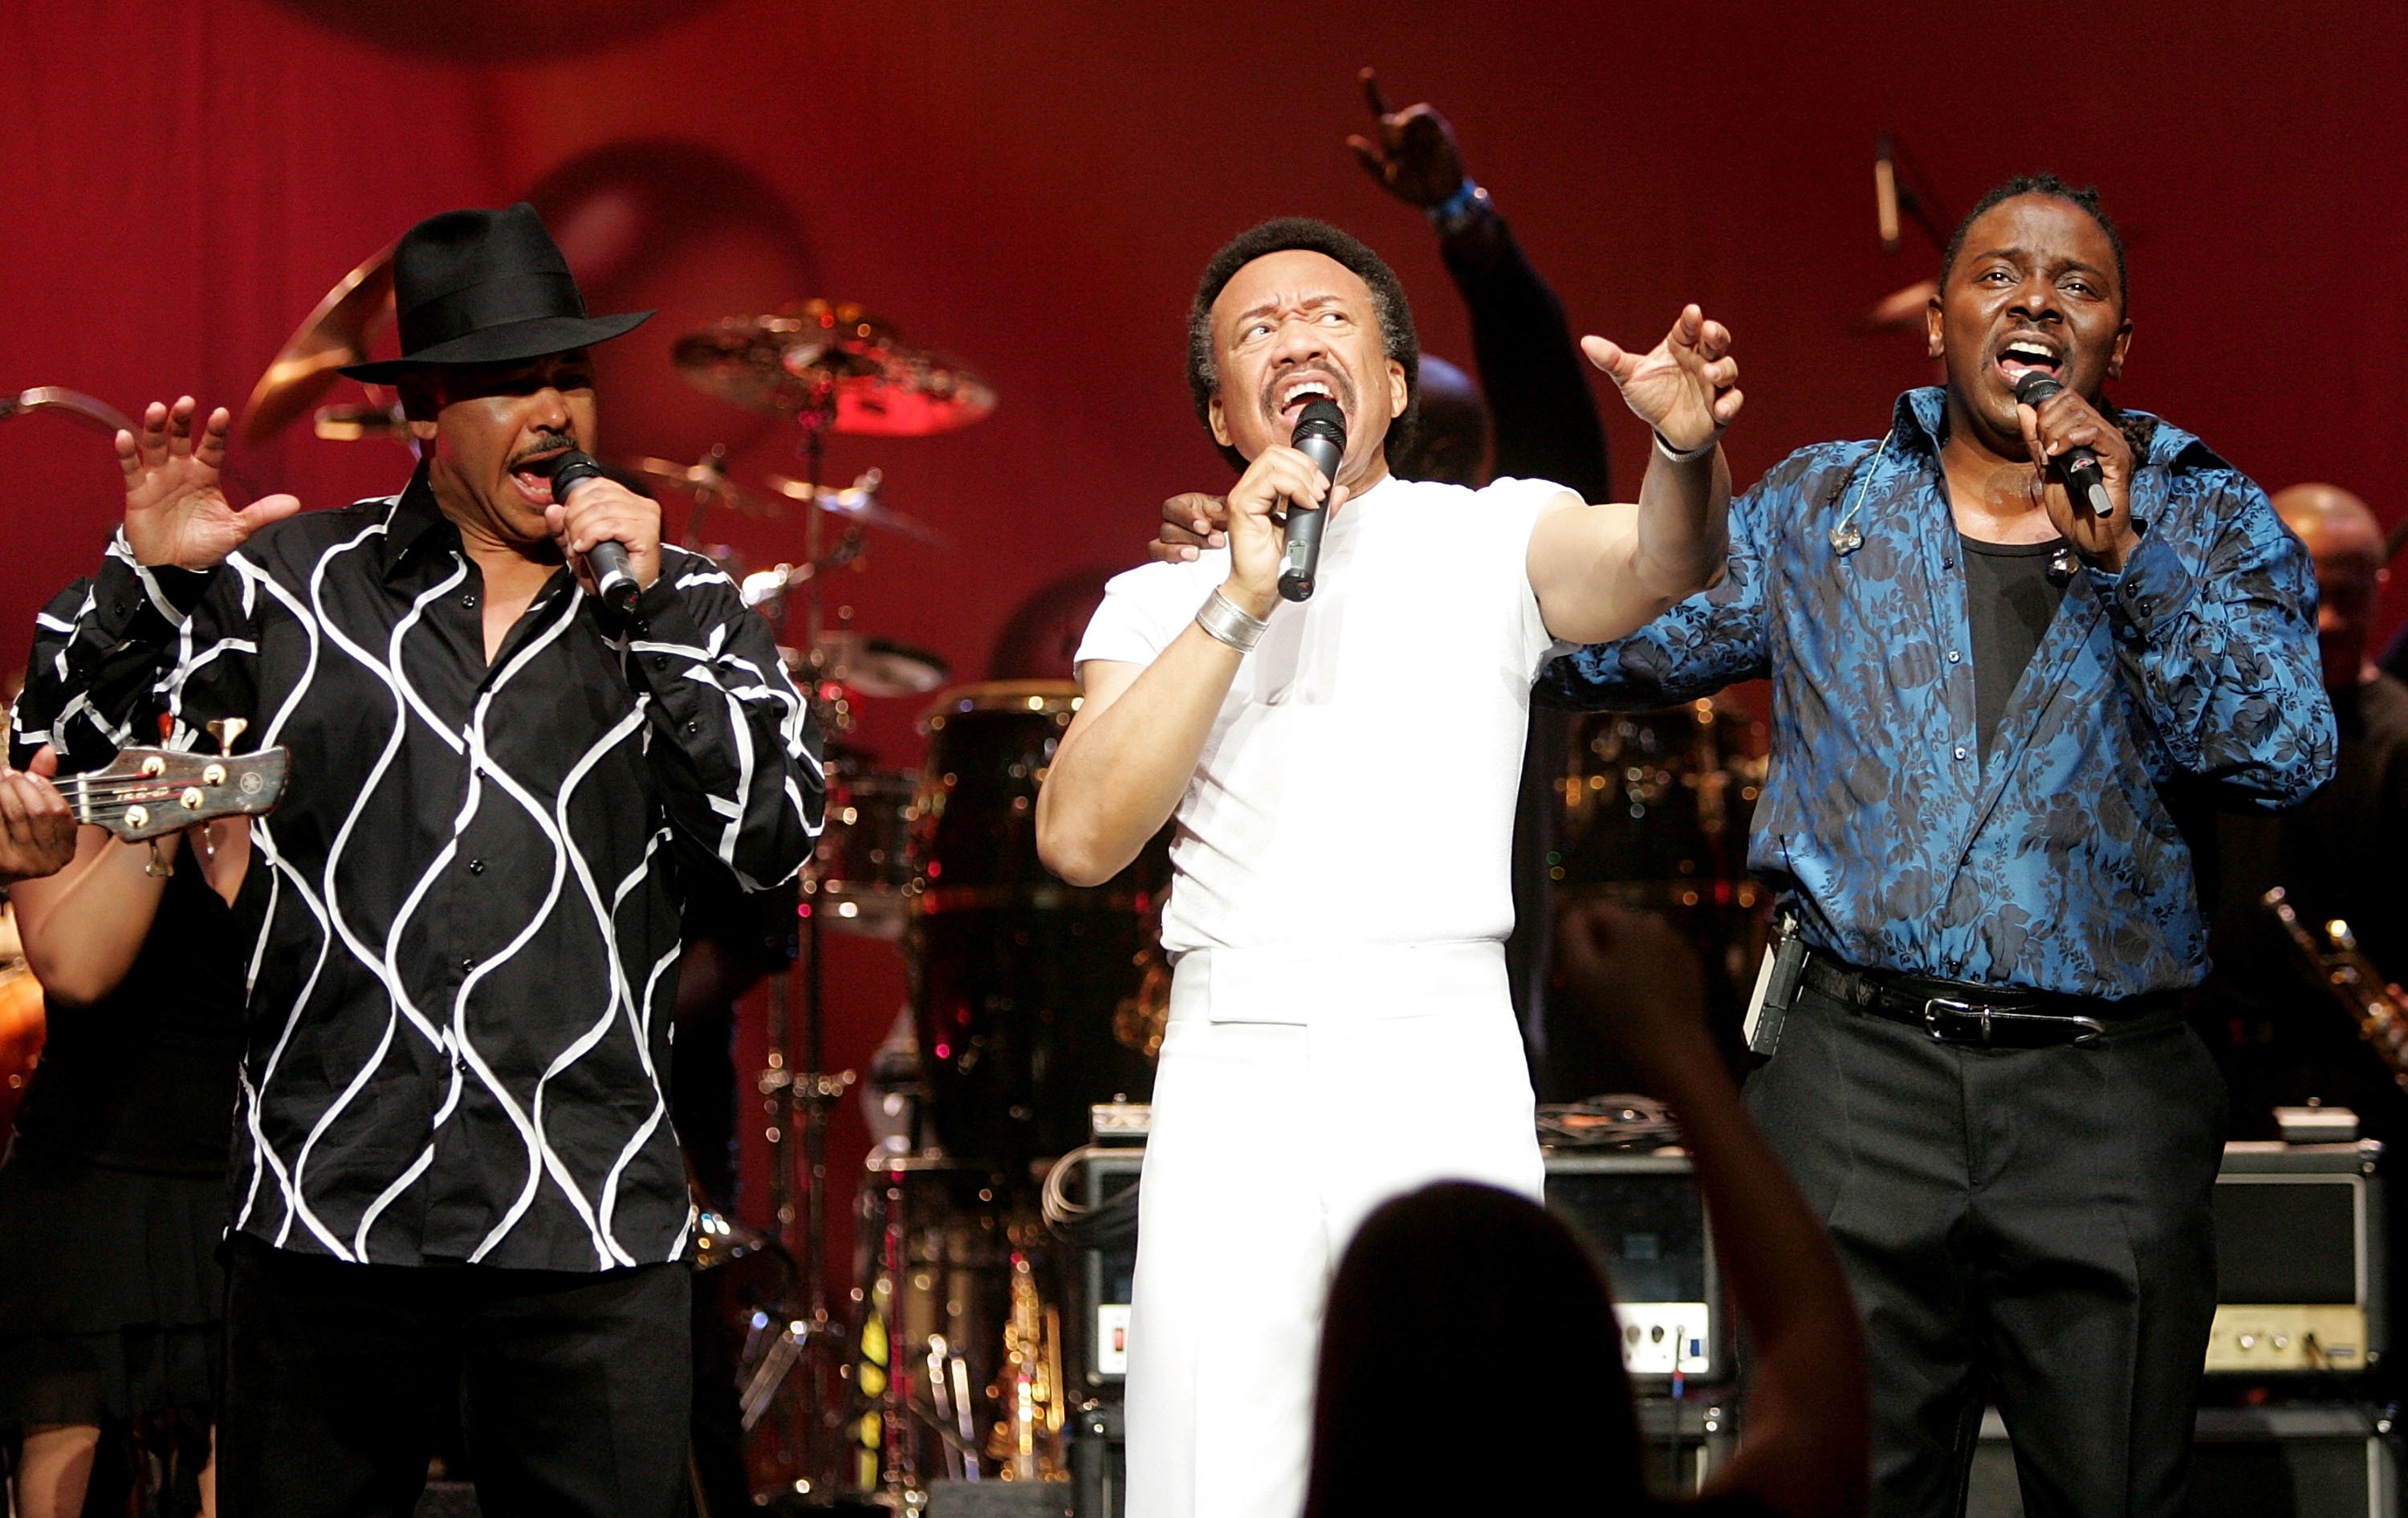 Earth, Wind & Fire performing onstage | Source: Getty Images/GlobalImagesUkraine